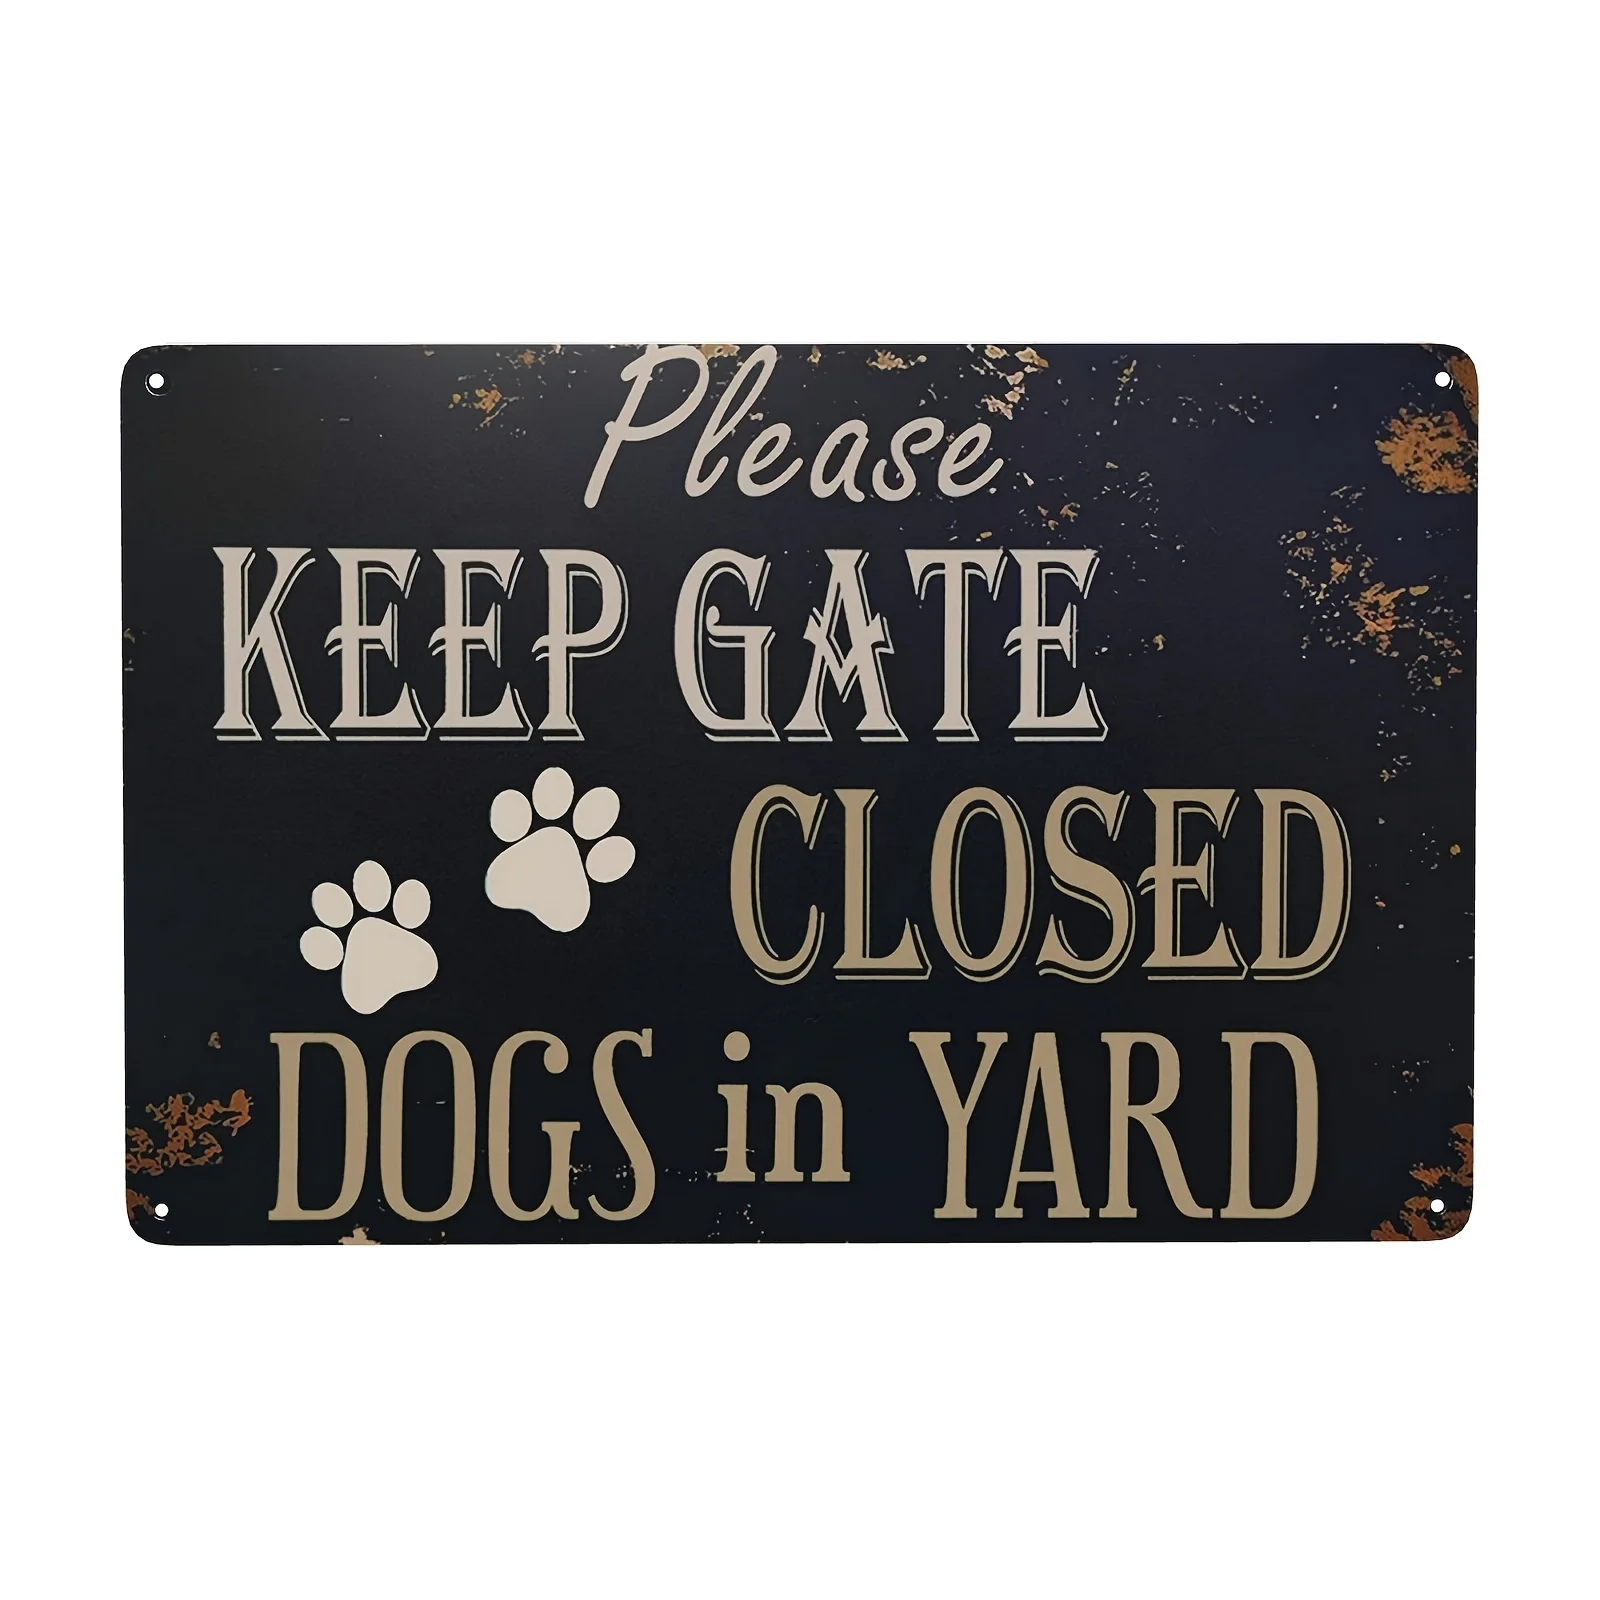 

Please Keep Gate Closed Dogs In Yard, Retro Vintage Metal Sign, Decor For Lawn Garden Yard Signs, 7.9inch*11.9inch